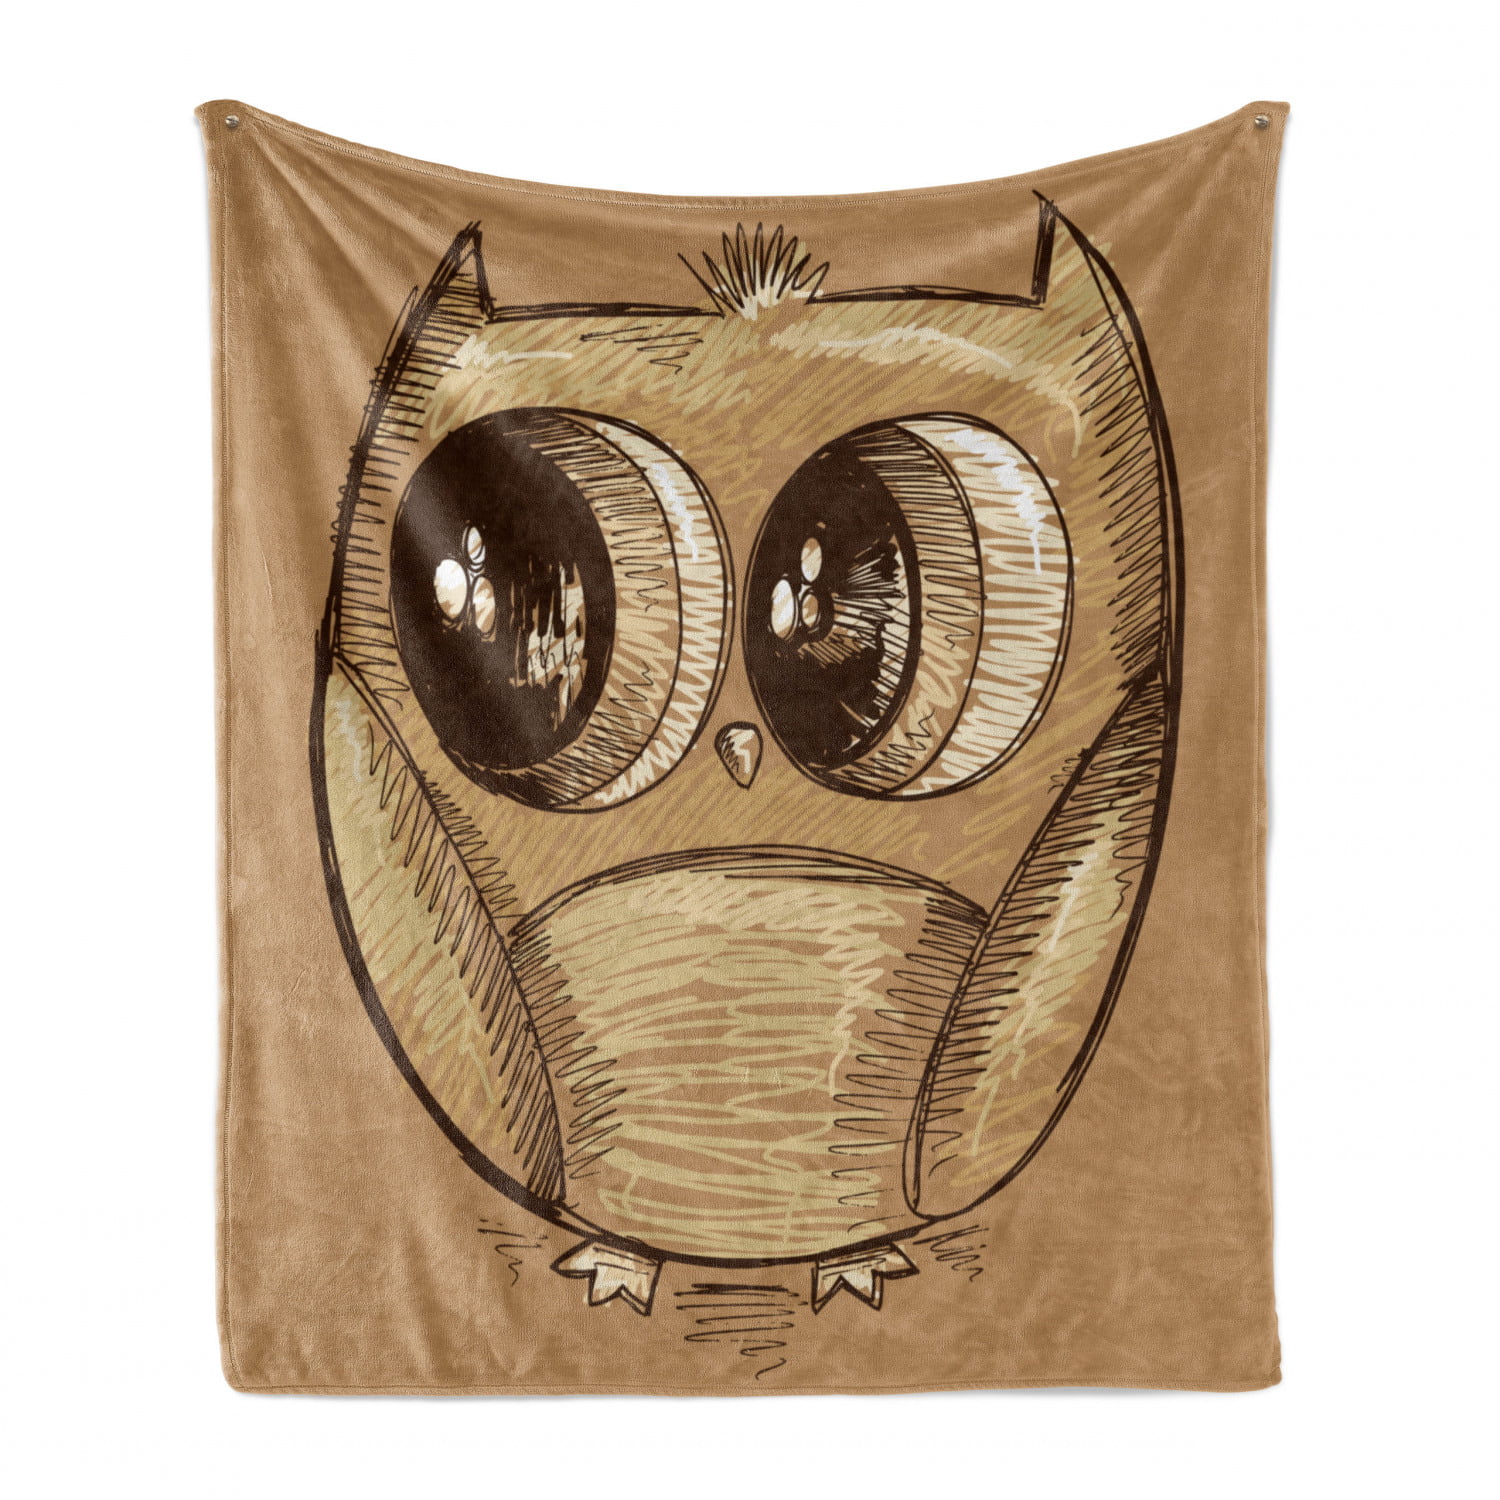 Soft Cozy Owl Flannel Blankets Pretty Cute Fleece Winter Throw Blankets for Adults Suitable Bed Couch Outdoor 